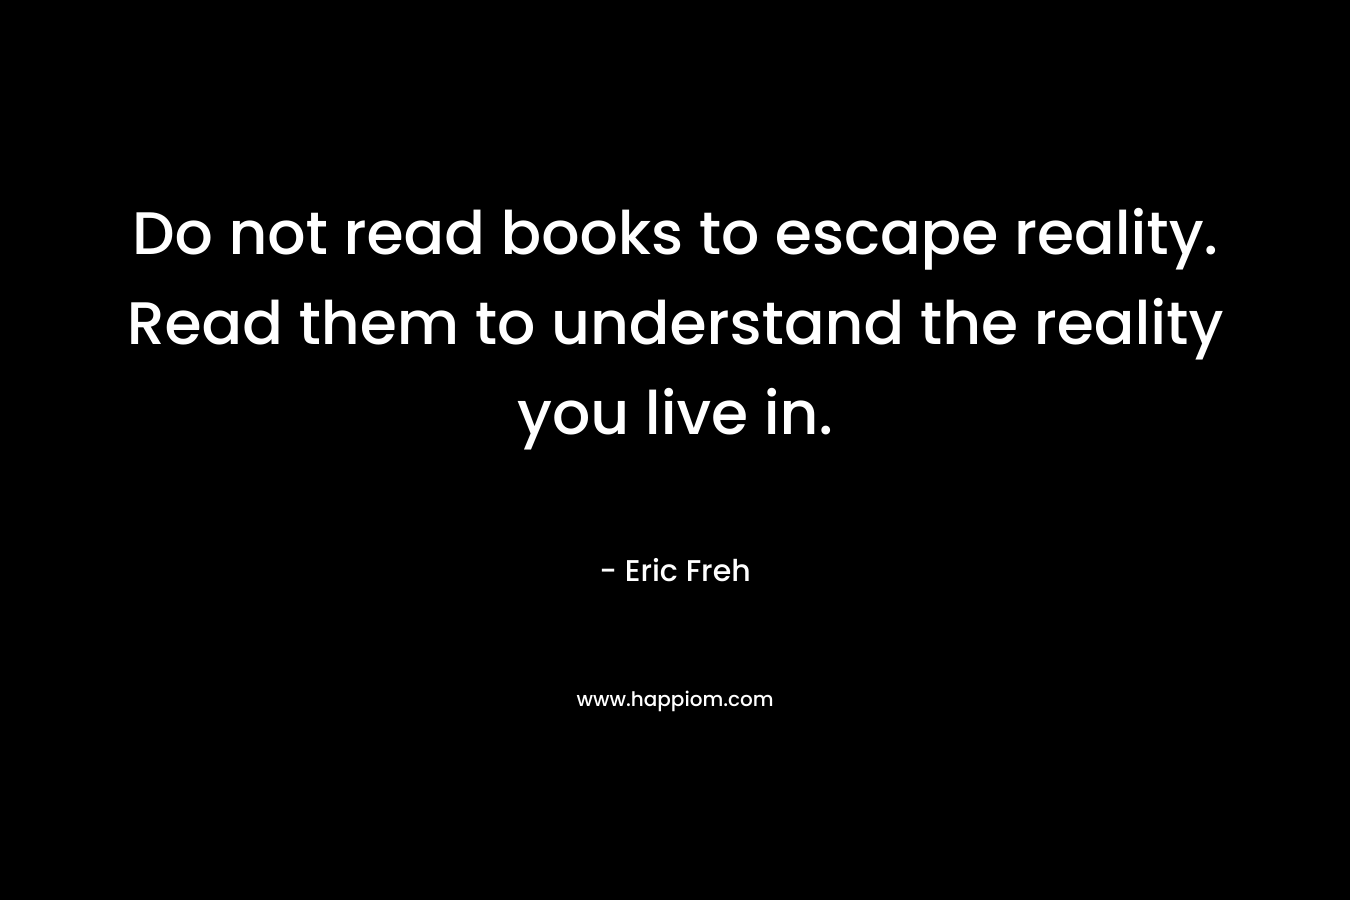 Do not read books to escape reality. Read them to understand the reality you live in.